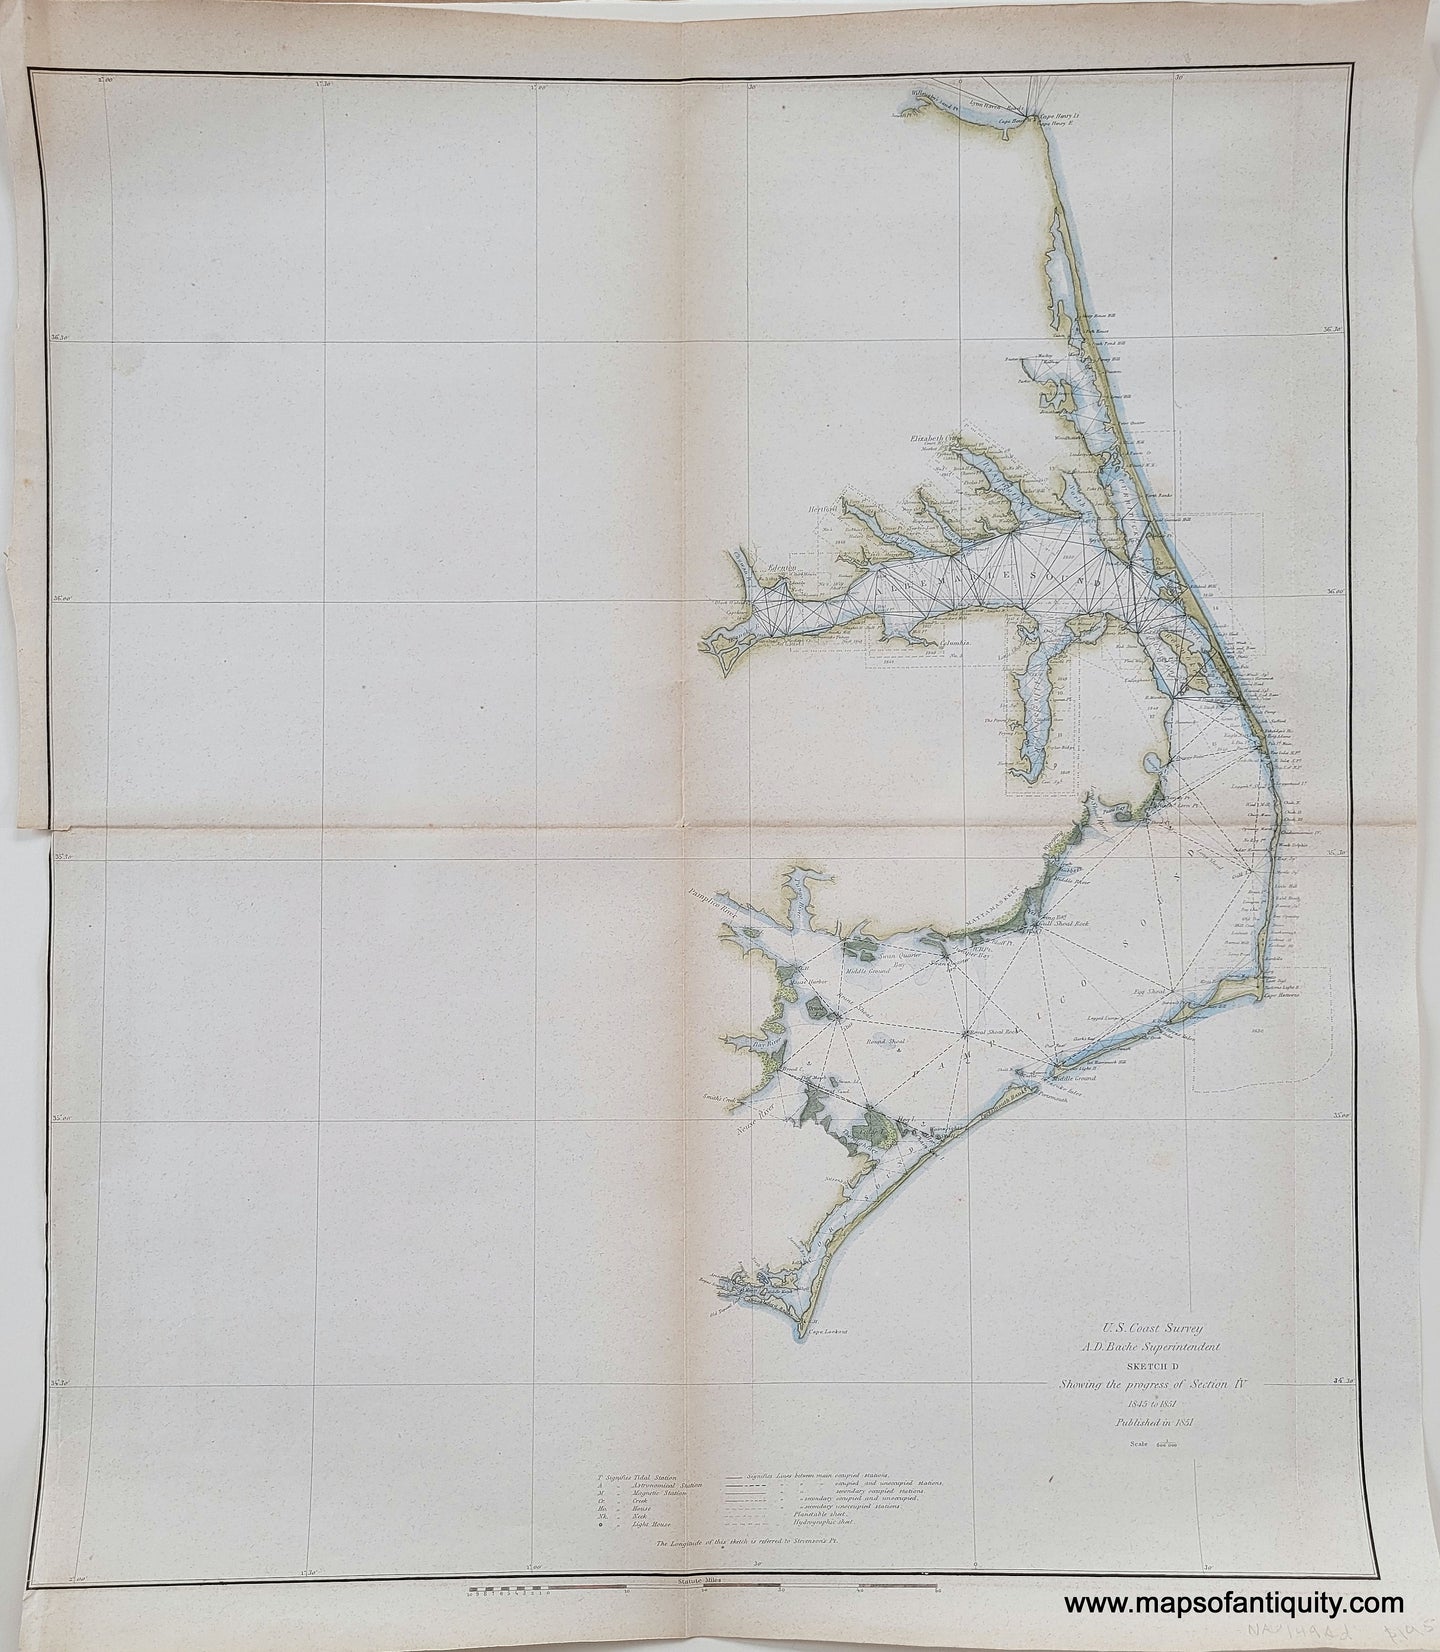 Light blue in the water along the coast and light green along the coast for the land. Antique-Hand-Colored-Coastal-Chart-Outer-Banks-North-Carolina-Pamlico-and-Albemarle-Sound-NC-Sketch-D-Section-IV-Triangulation-Chart---United-States-South-1851-U.S.-Coast-Survey-Maps-Of-Antiquity